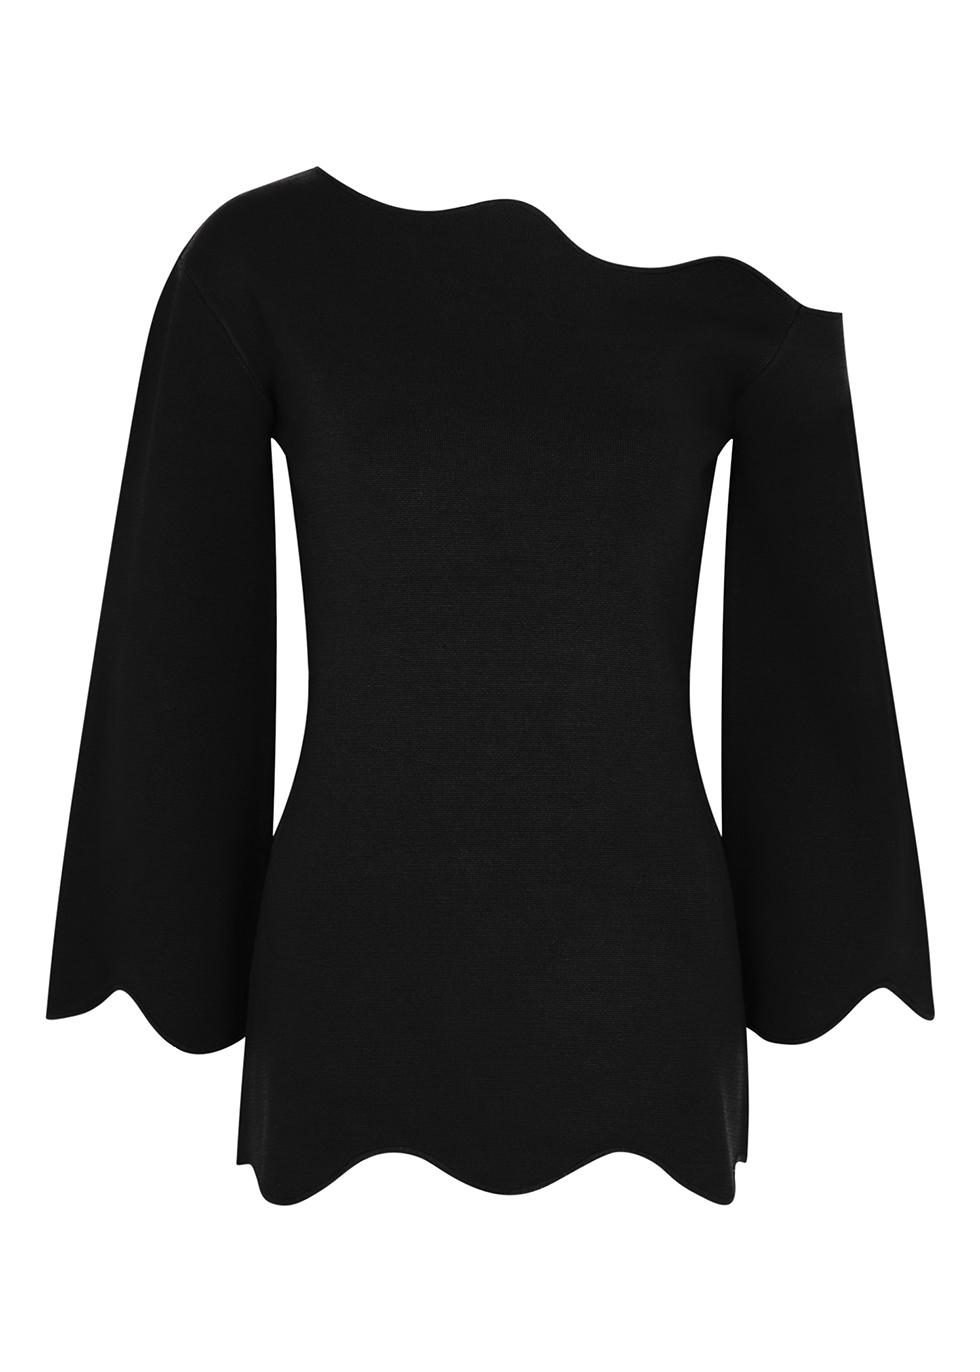 Vikie black scalloped knitted top by BY MALENE BIRGER